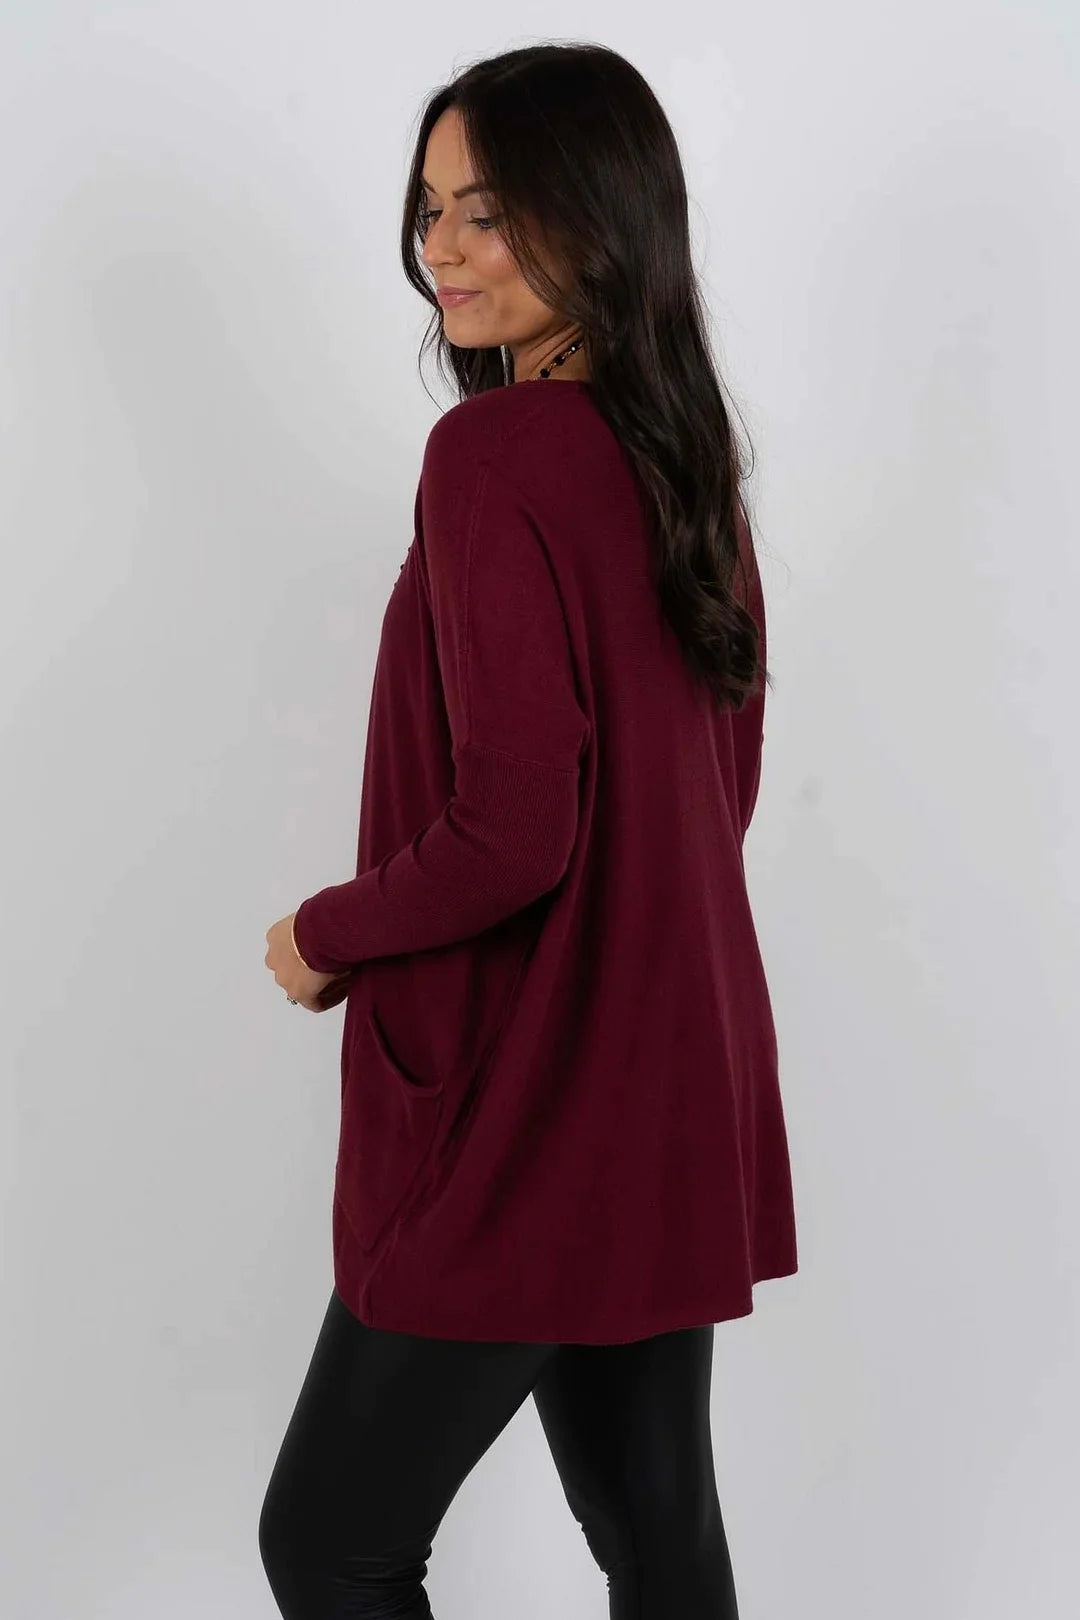 Quiza - Timeless and flattering jumper